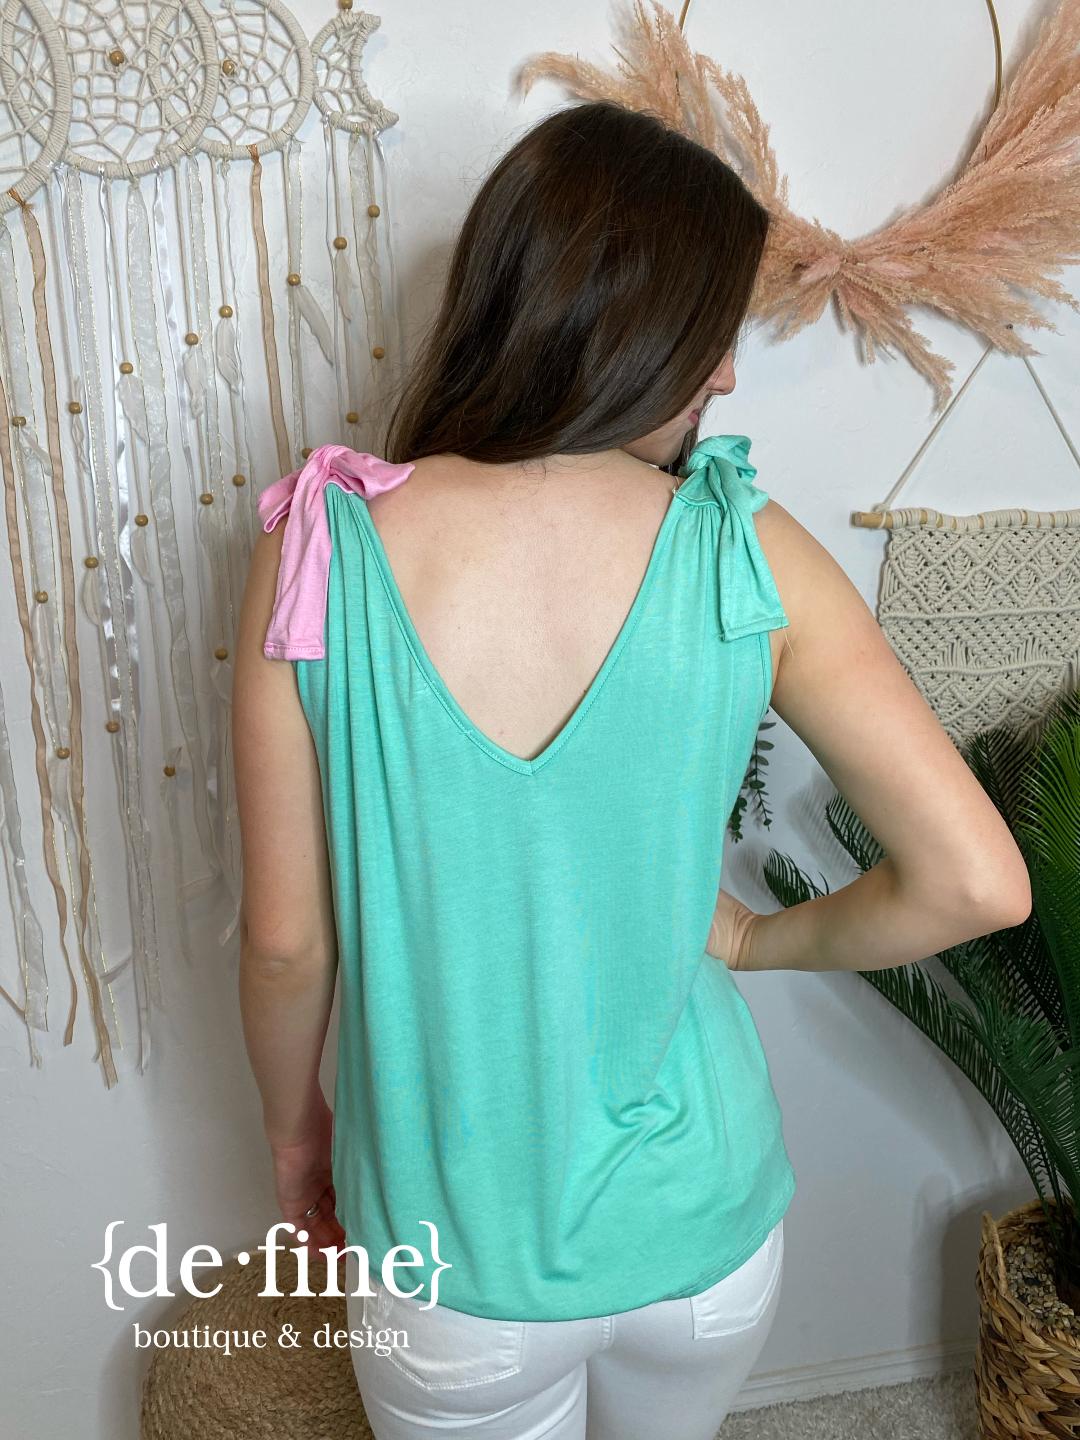 Duo Pink and Turquoise Tank